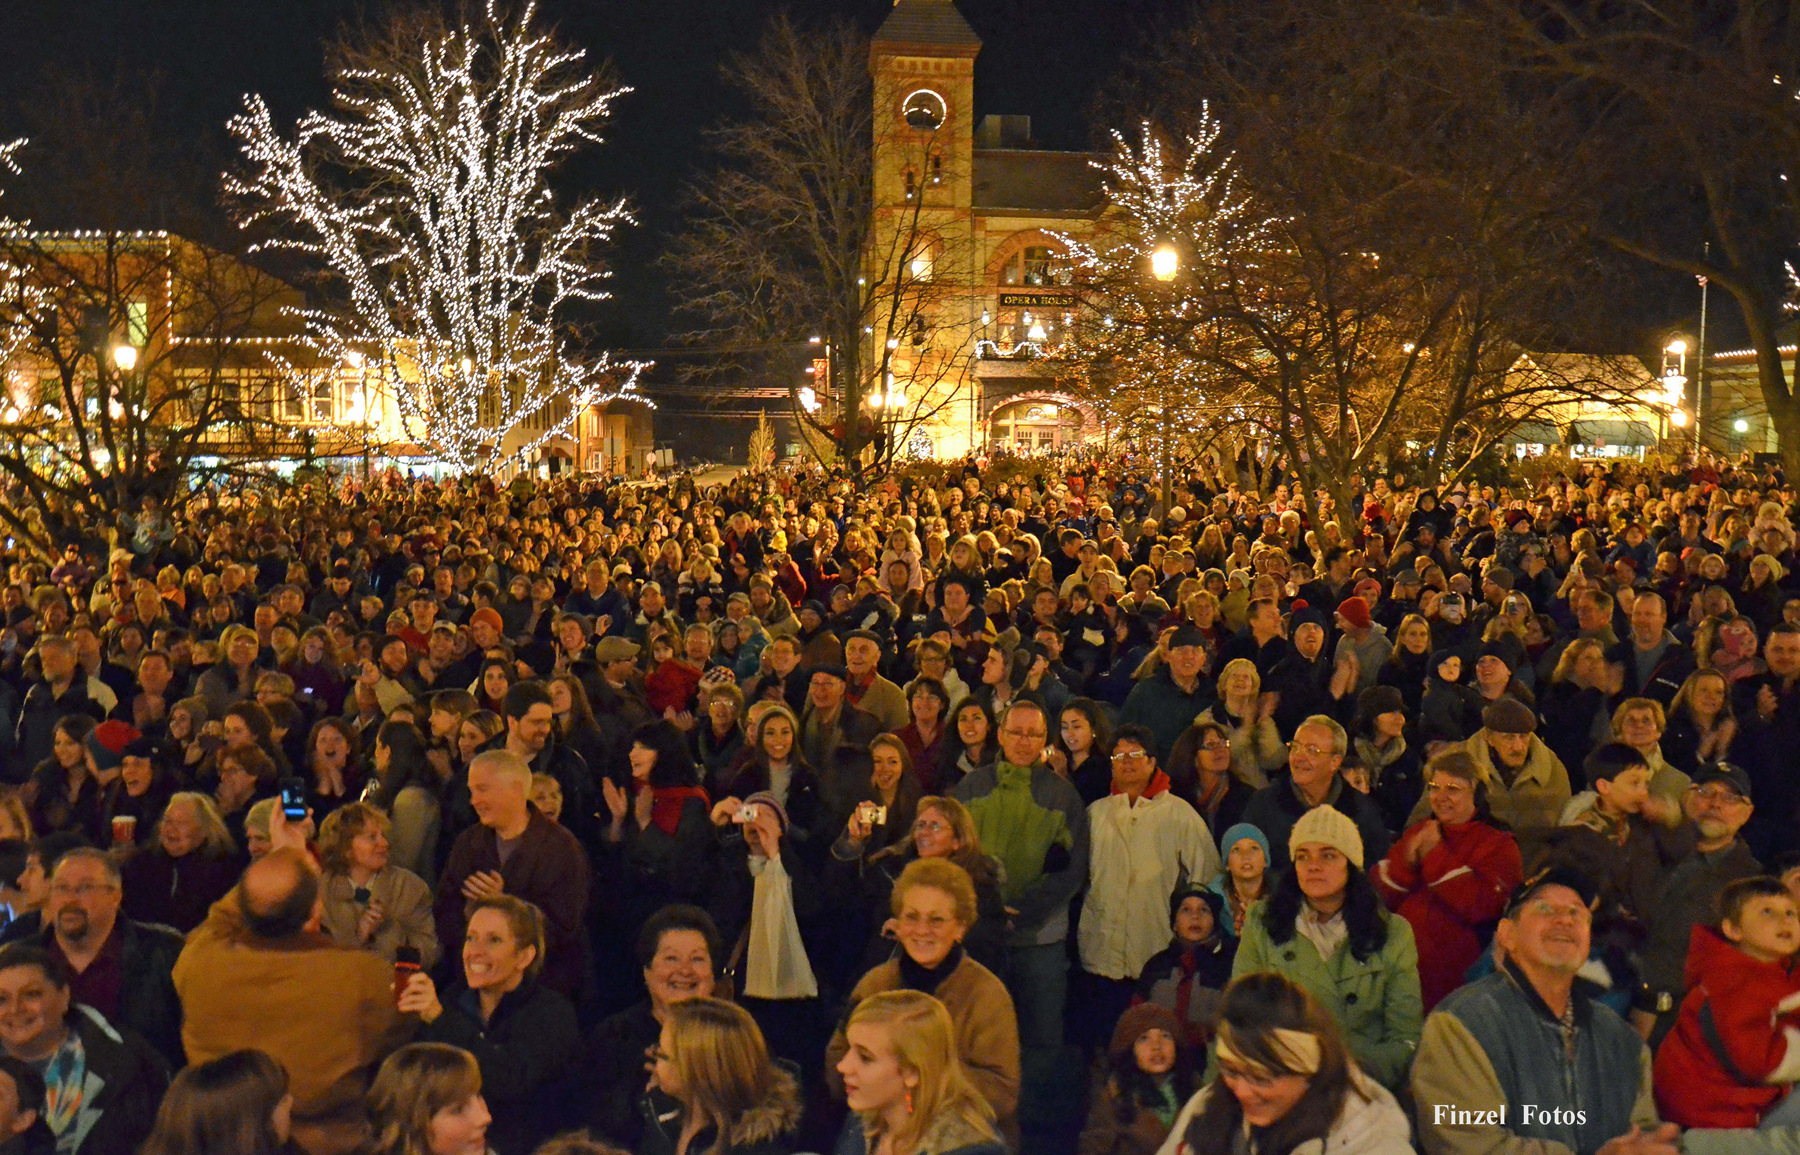 Residents celebrate the annual Lighting of the Square event in the Woodstock Square Historic District, where the 1993 movie, Groundhog Day, was filmed.